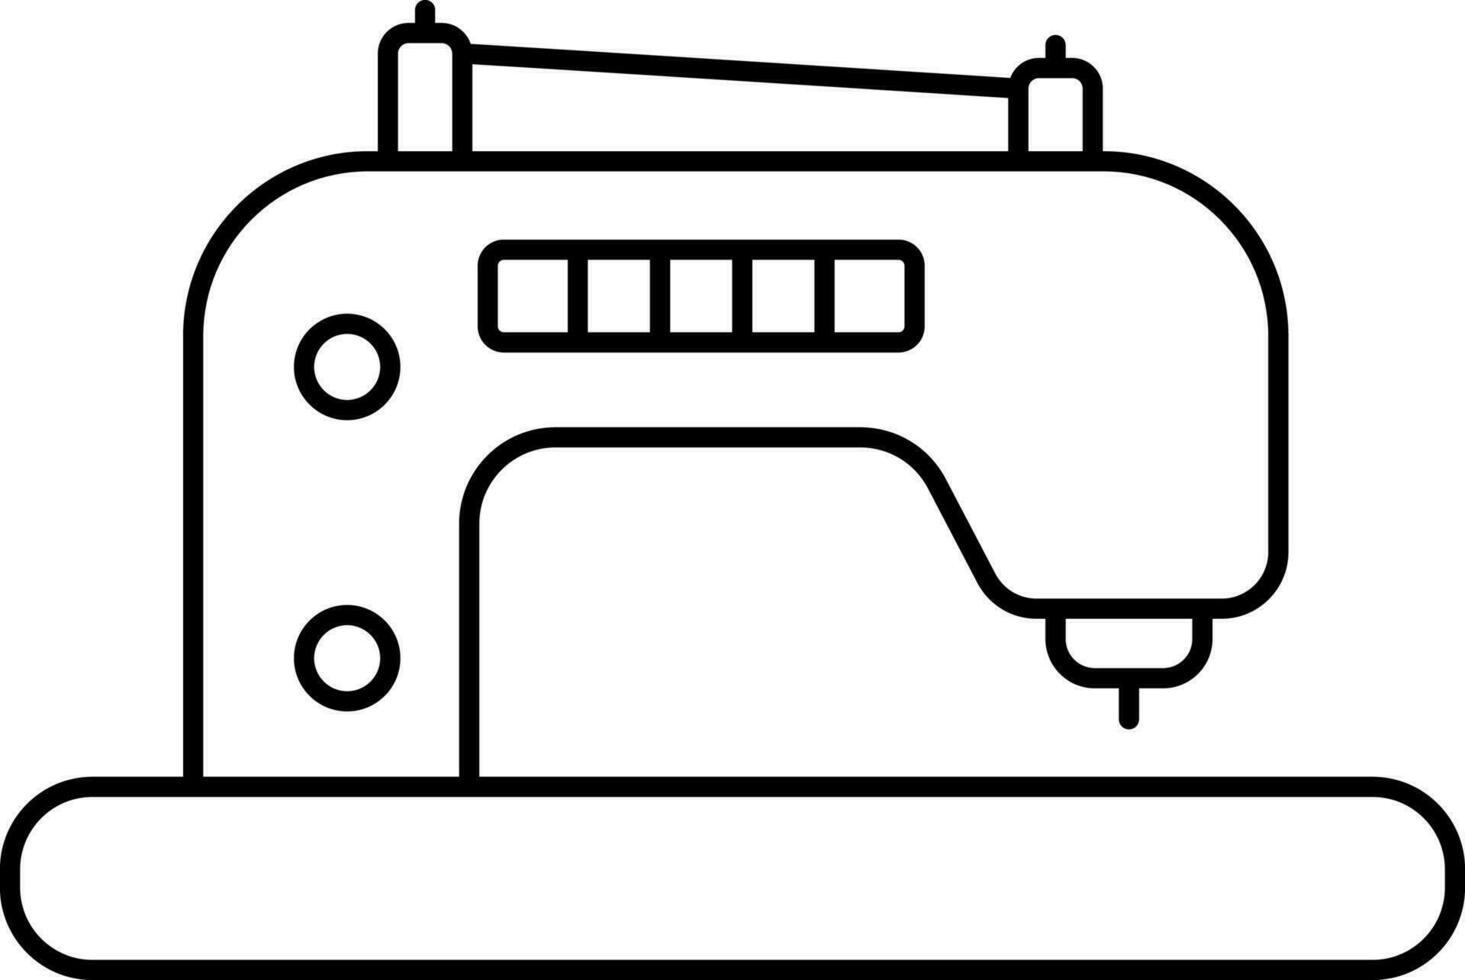 Digital Sewing Machine Black Outline Icon. vector